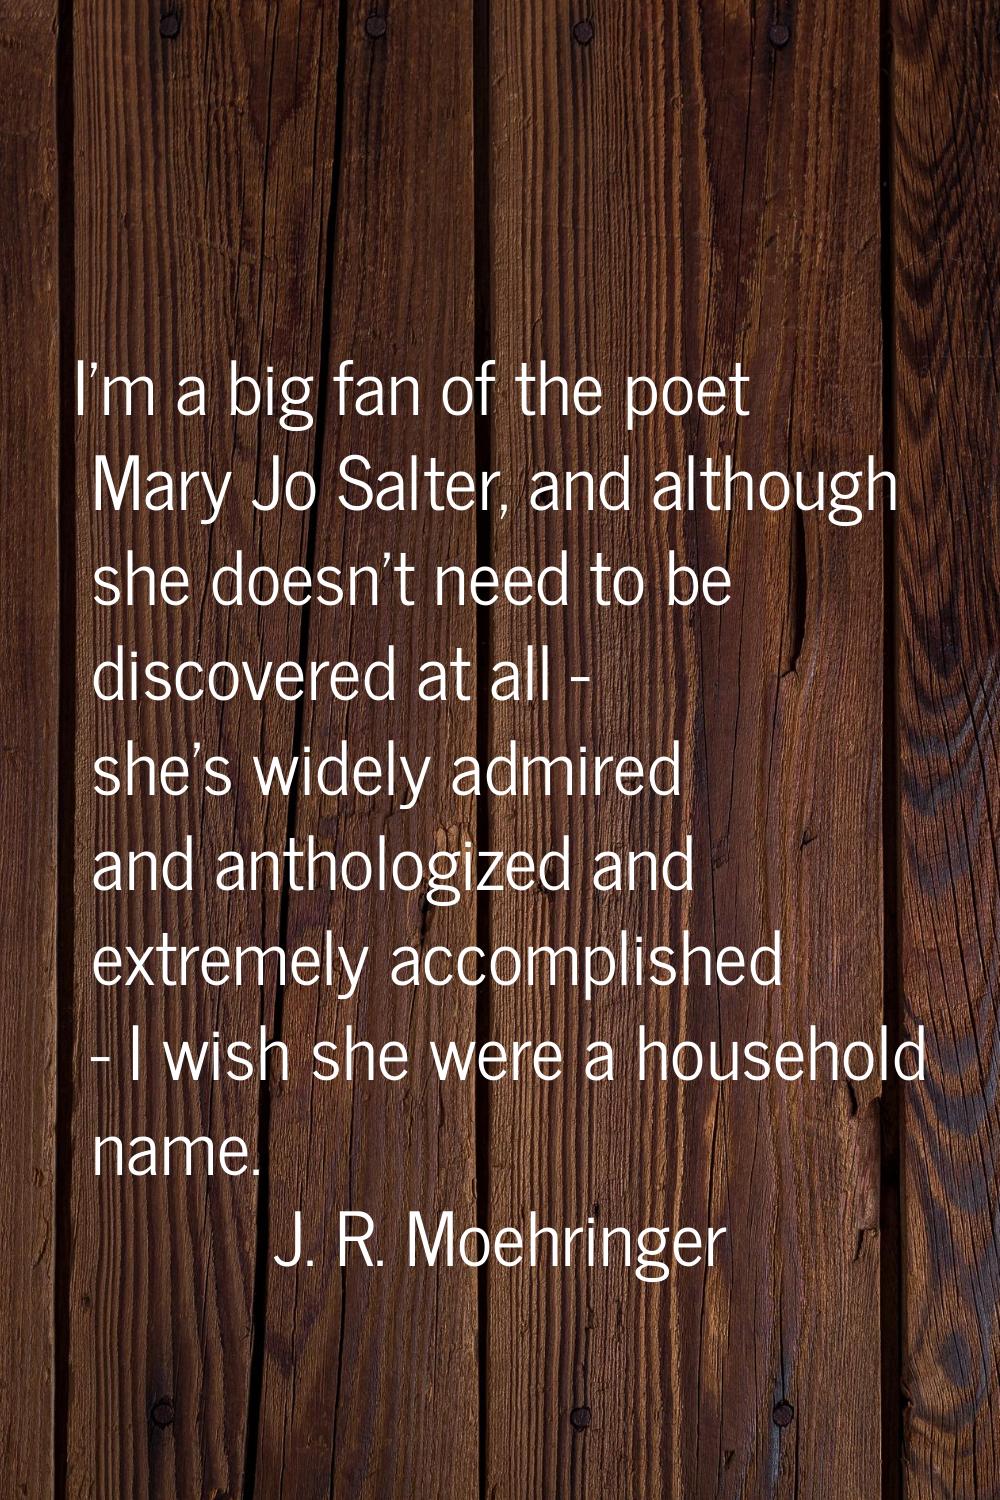 I'm a big fan of the poet Mary Jo Salter, and although she doesn't need to be discovered at all - s